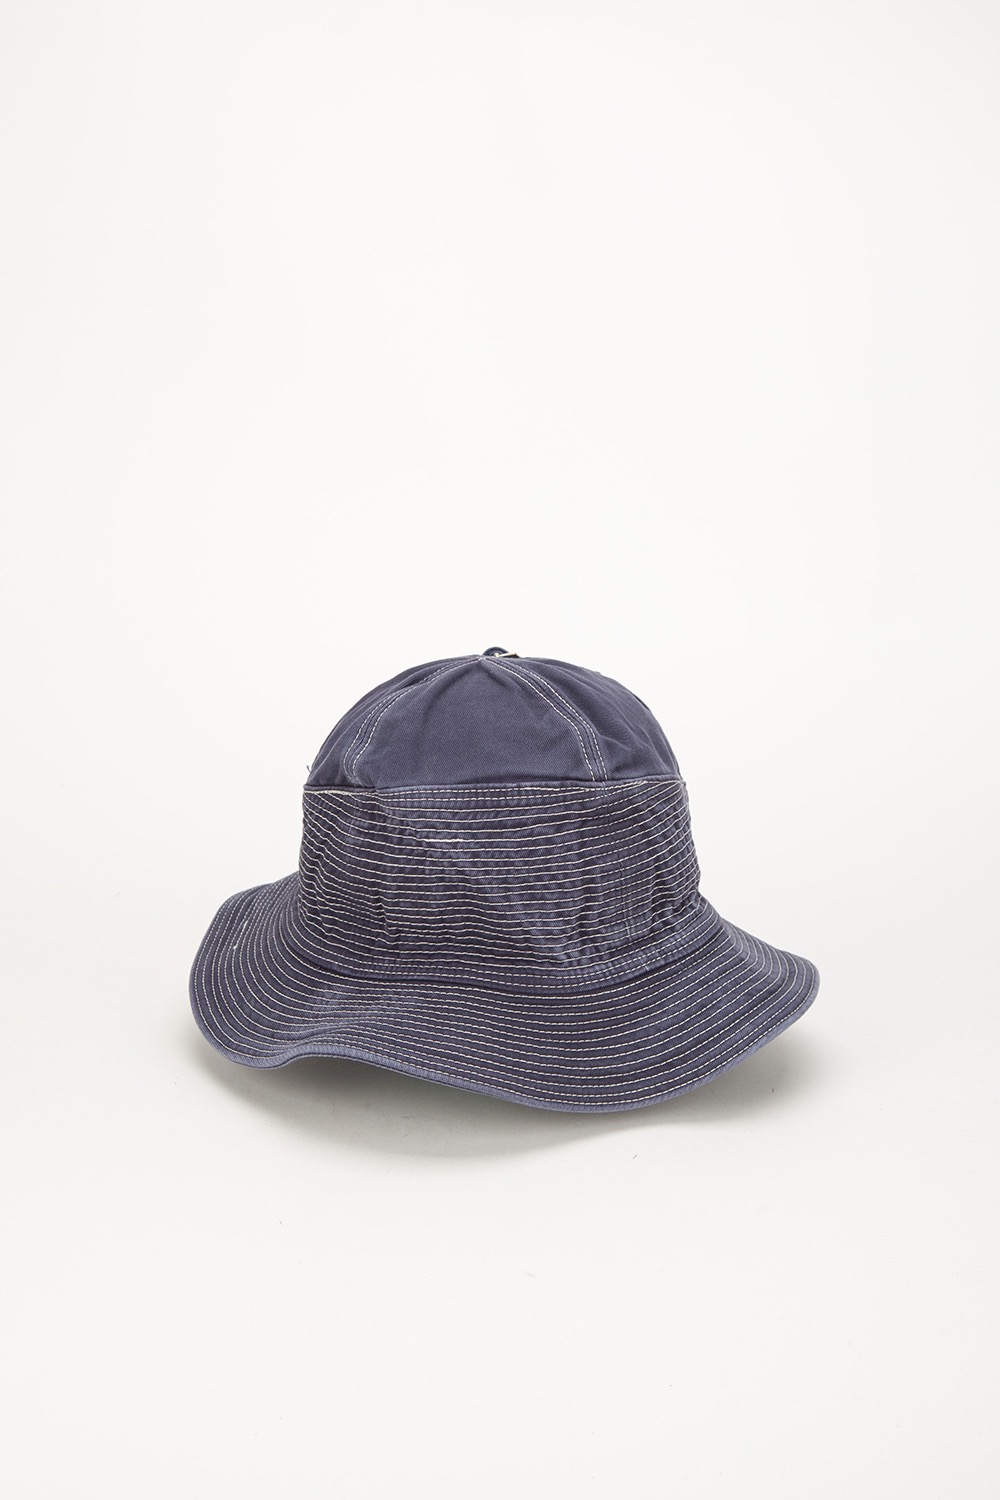 (22FW) (EK-1101) CHINO THE OLD MAN AND THE SEA HAT NAVY